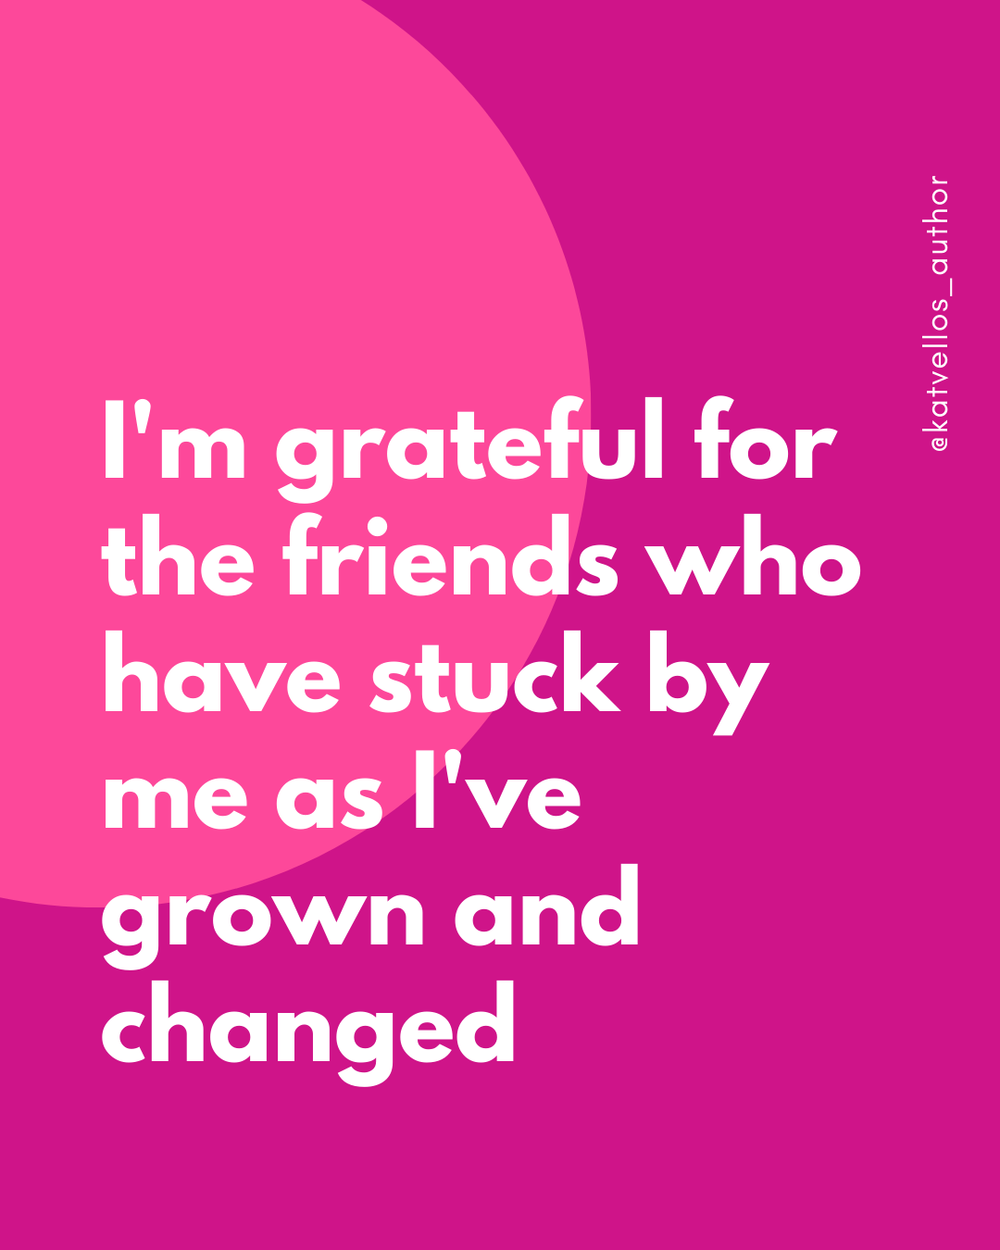 Friendship Affirmations by Kat Vellos at weshouldgettogether.com4.png